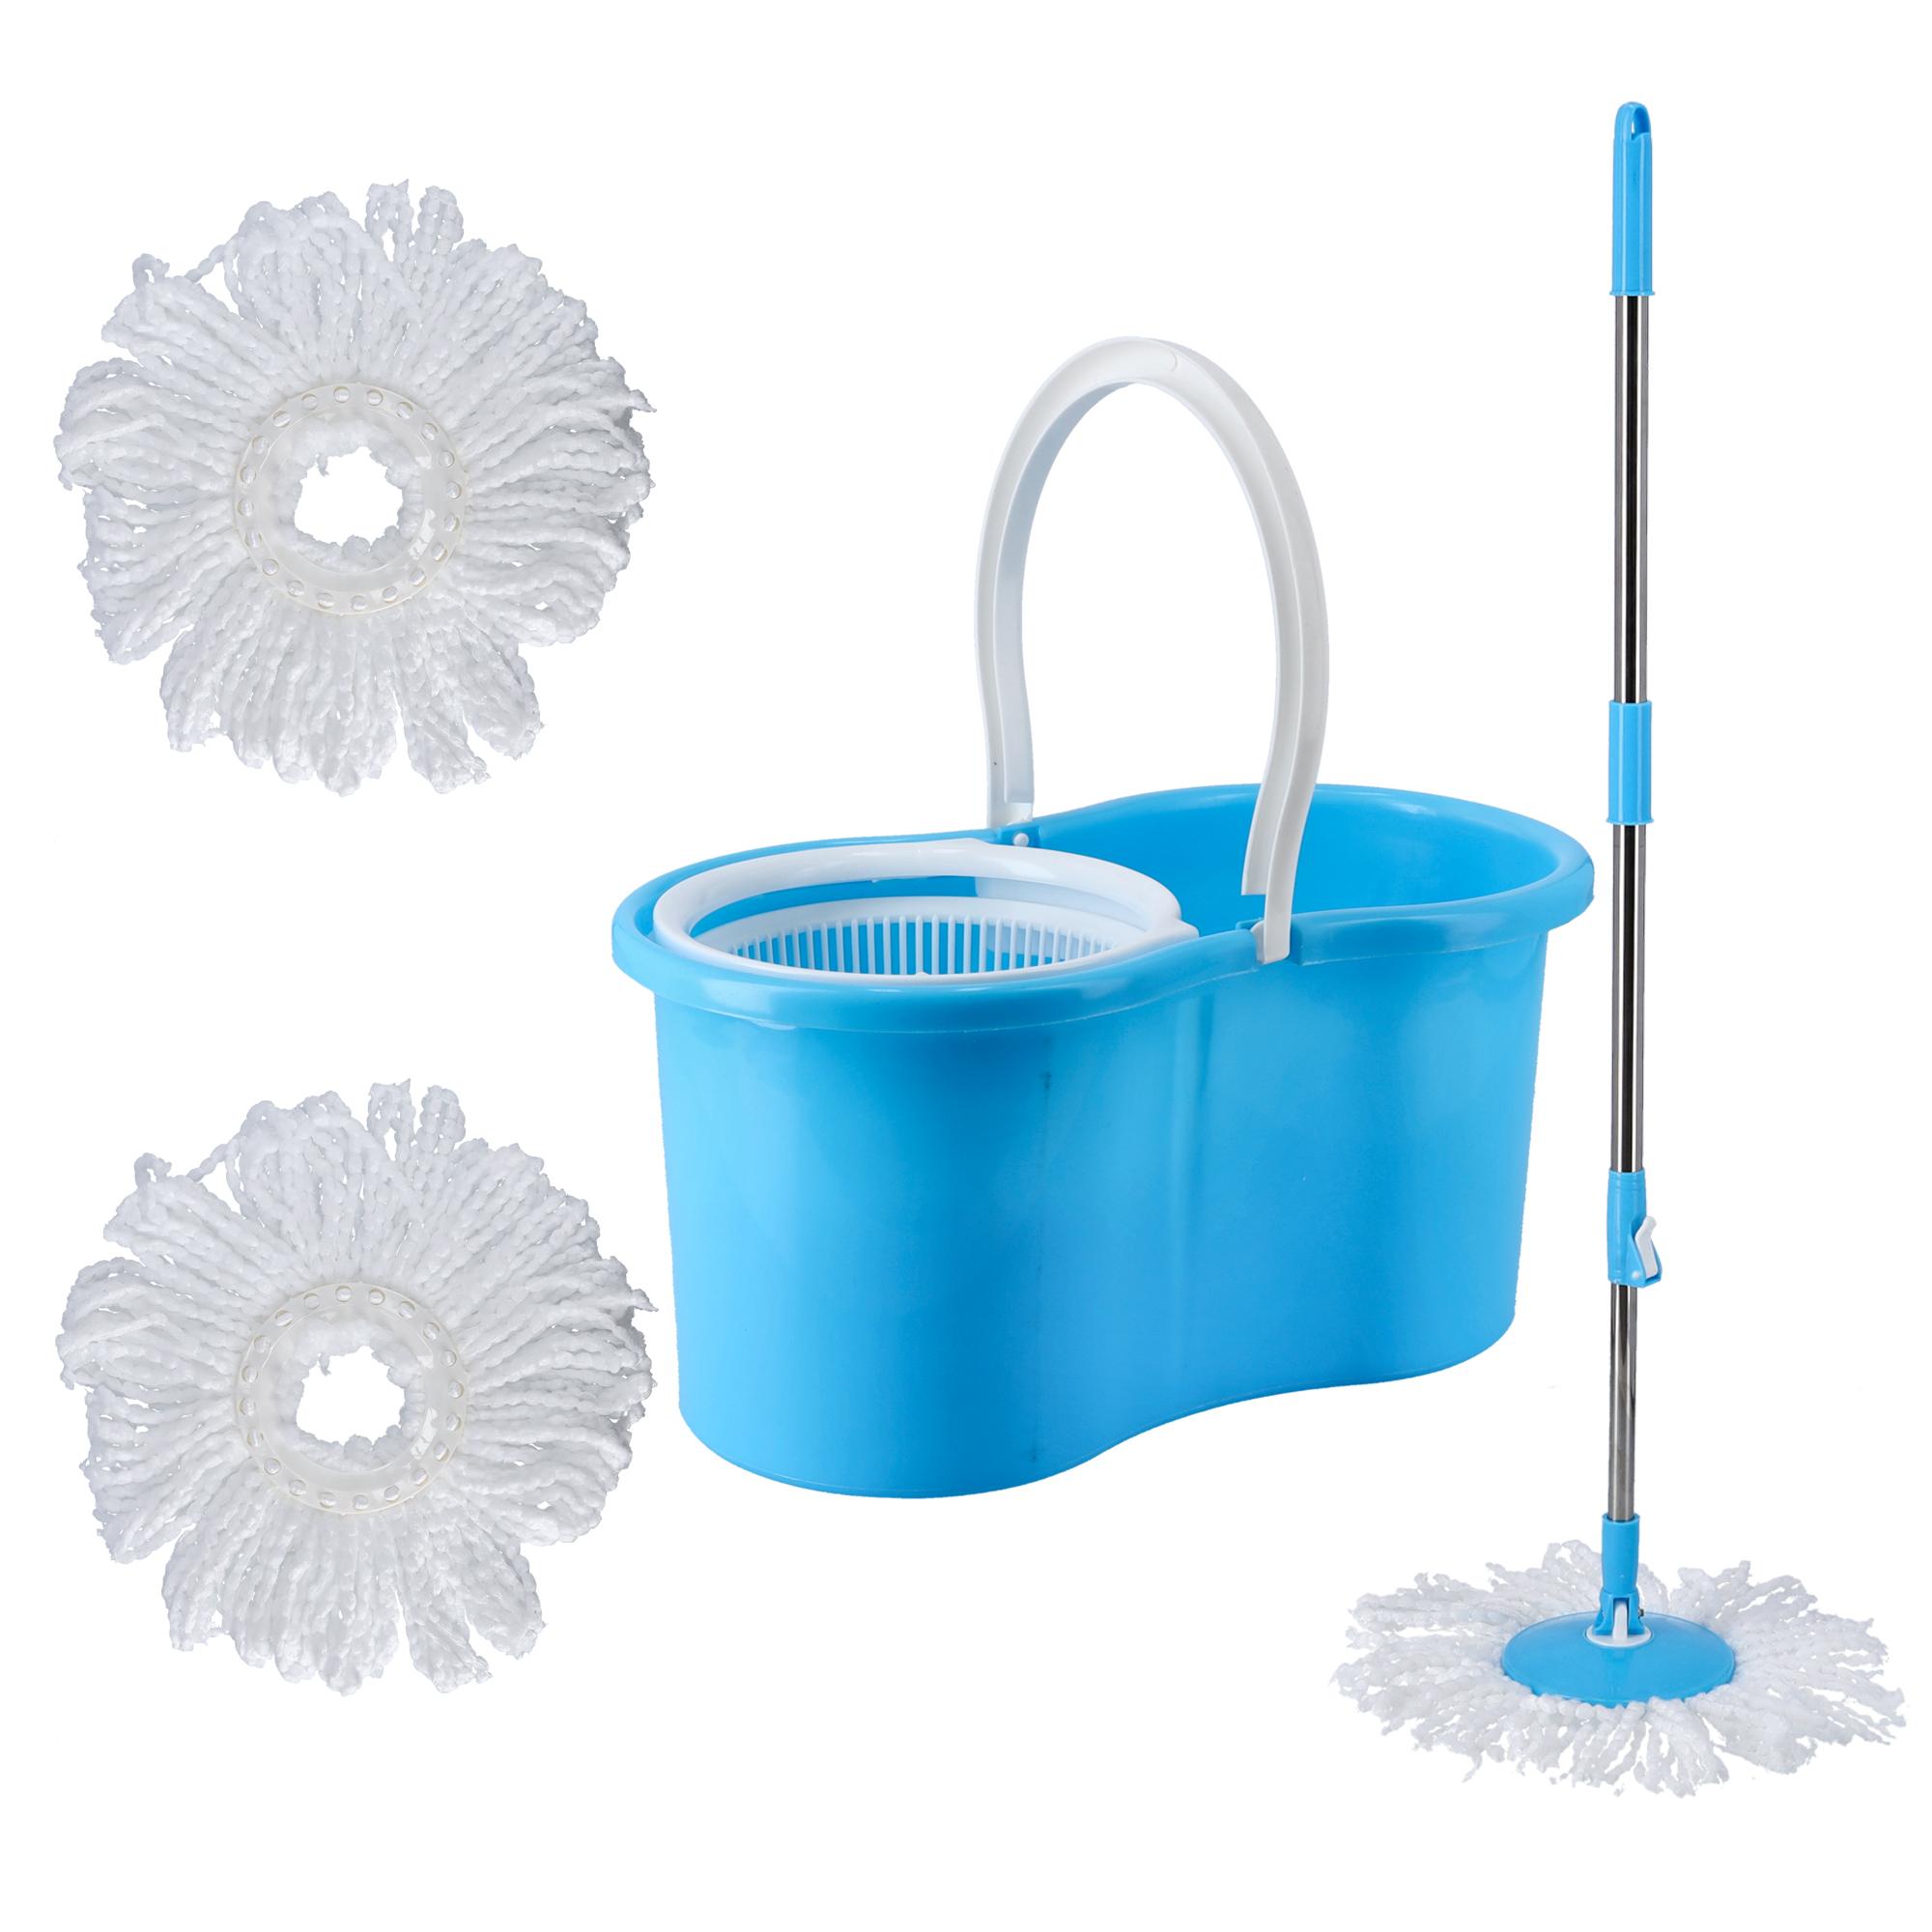 Delcasa Spin Mop with 360° Rotating Mop Plate | DC1846 | Microfiber Mop Head | With Additional Refill and Adjustable Height | Faster Dehydration